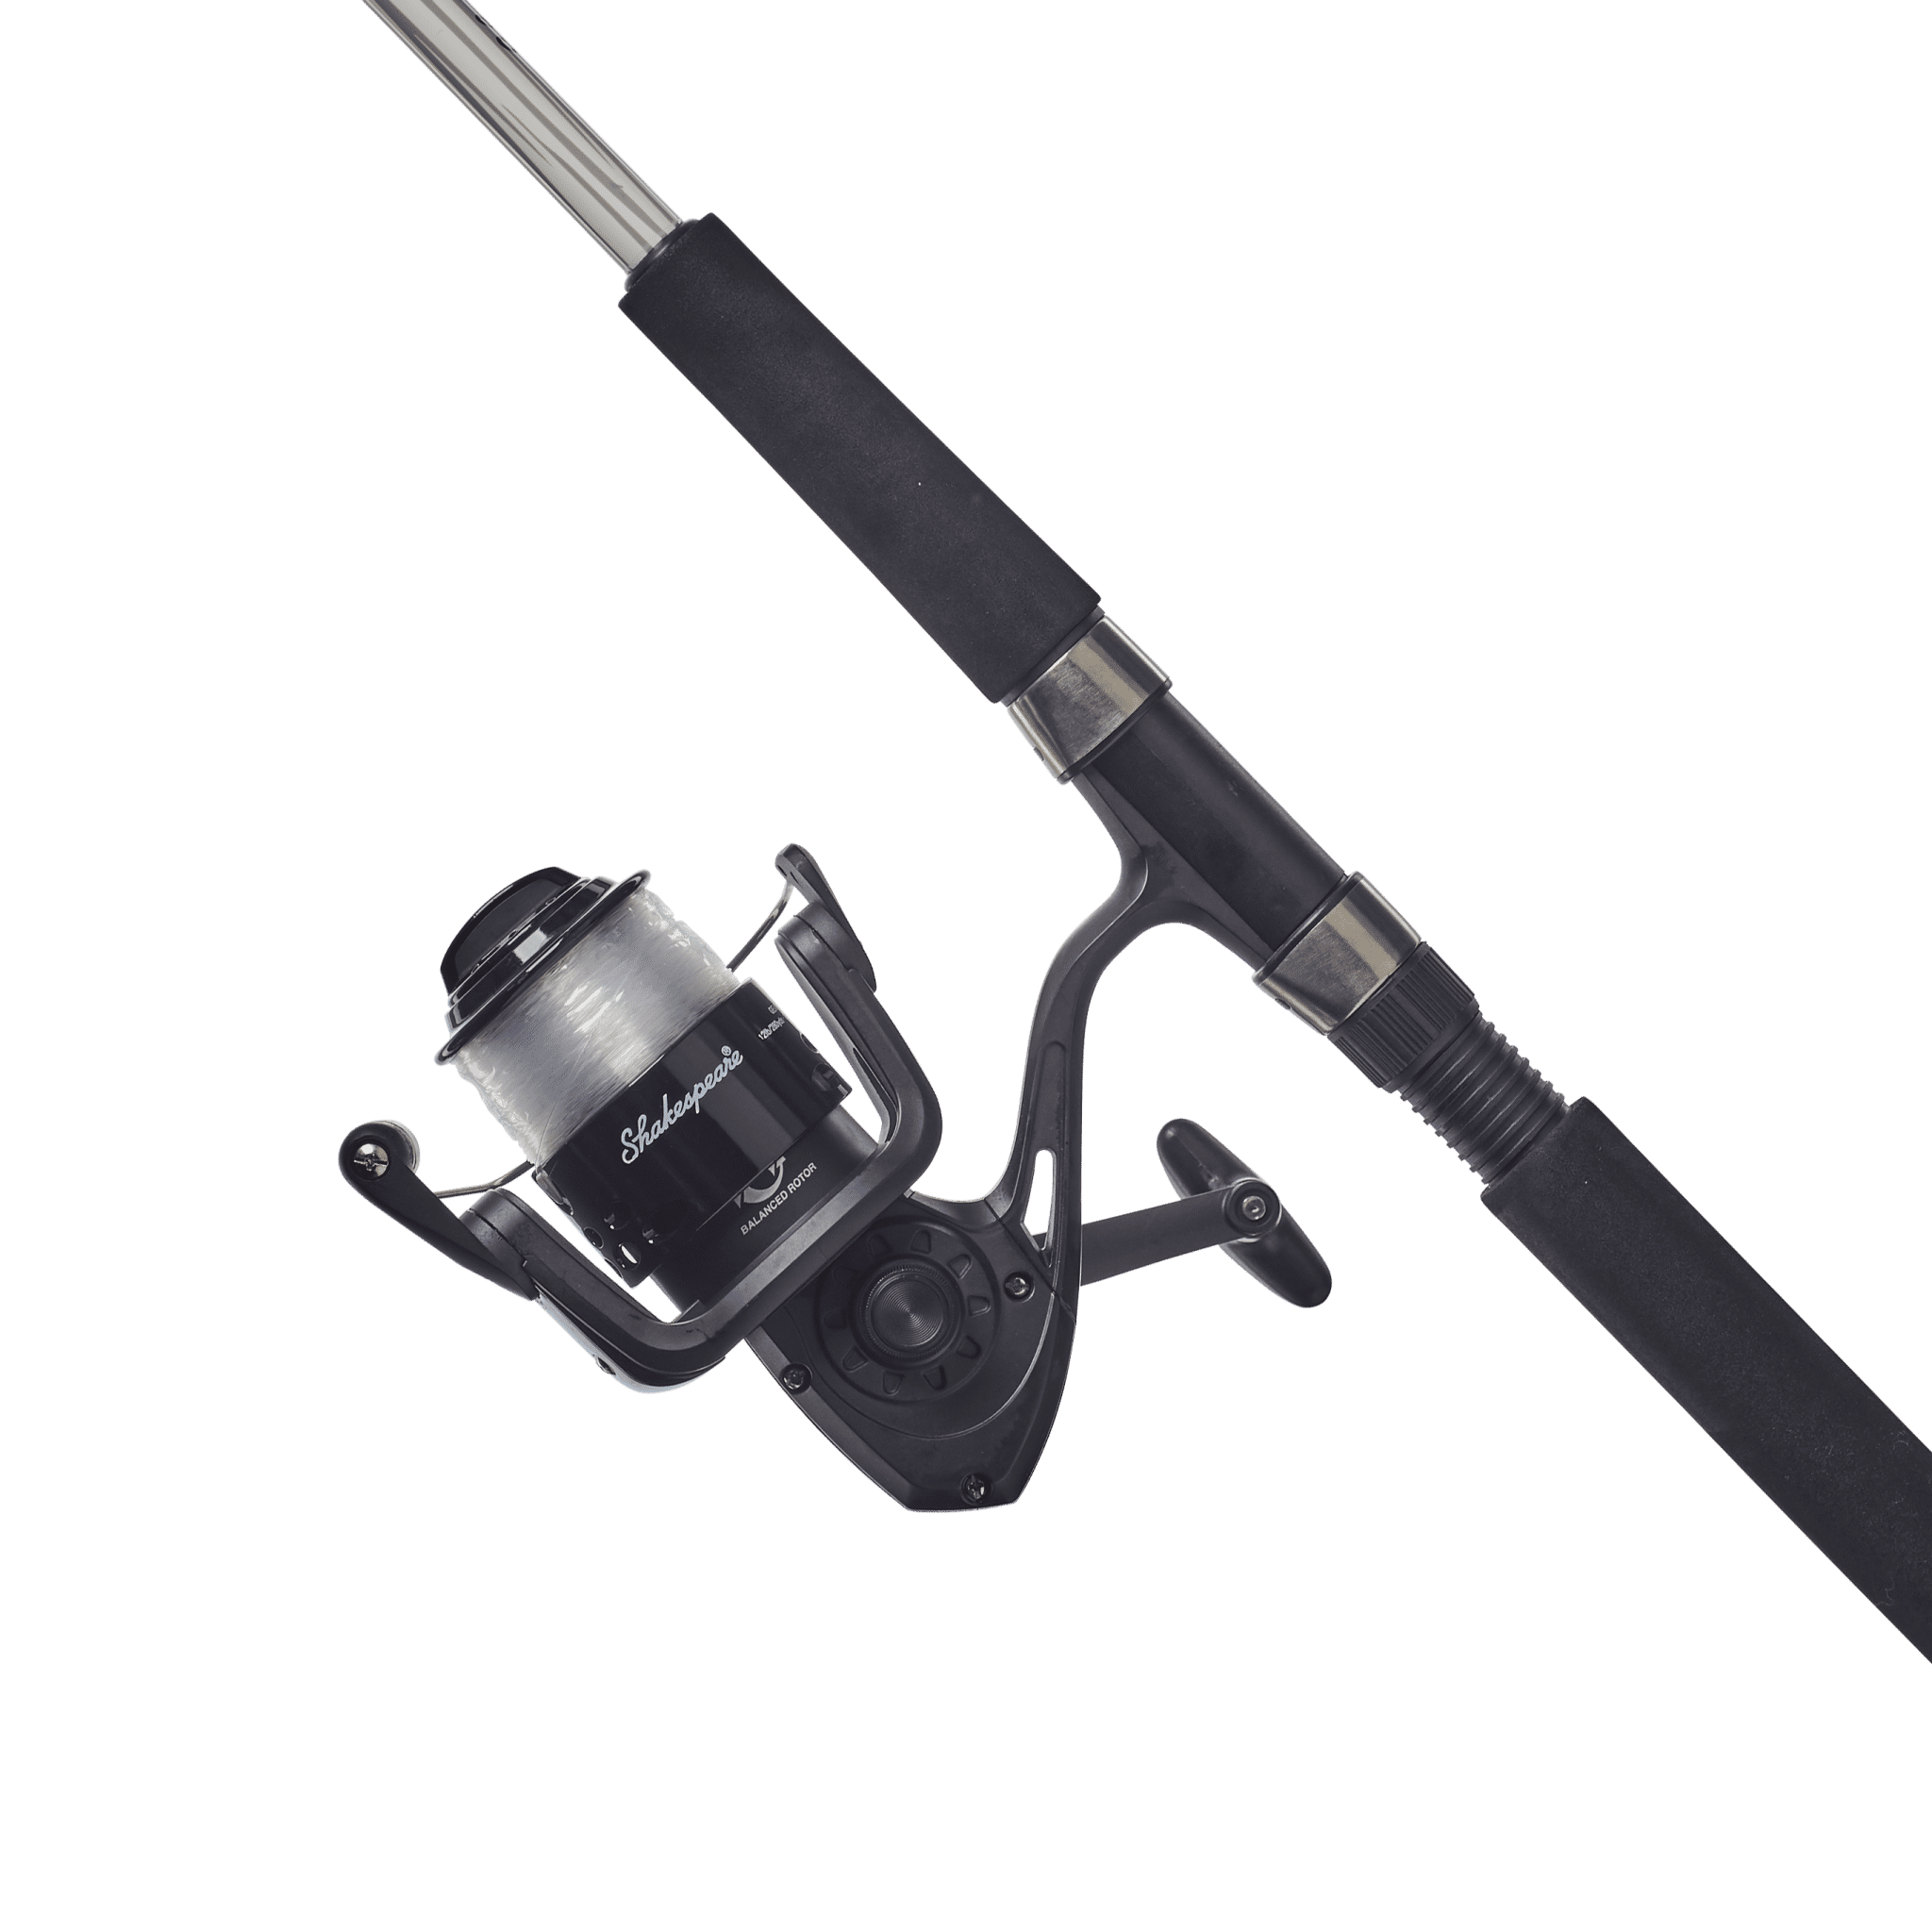 Shakespeare Tiger Spinning Fishing Rod and Reel for Sale in Olympia, WA -  OfferUp